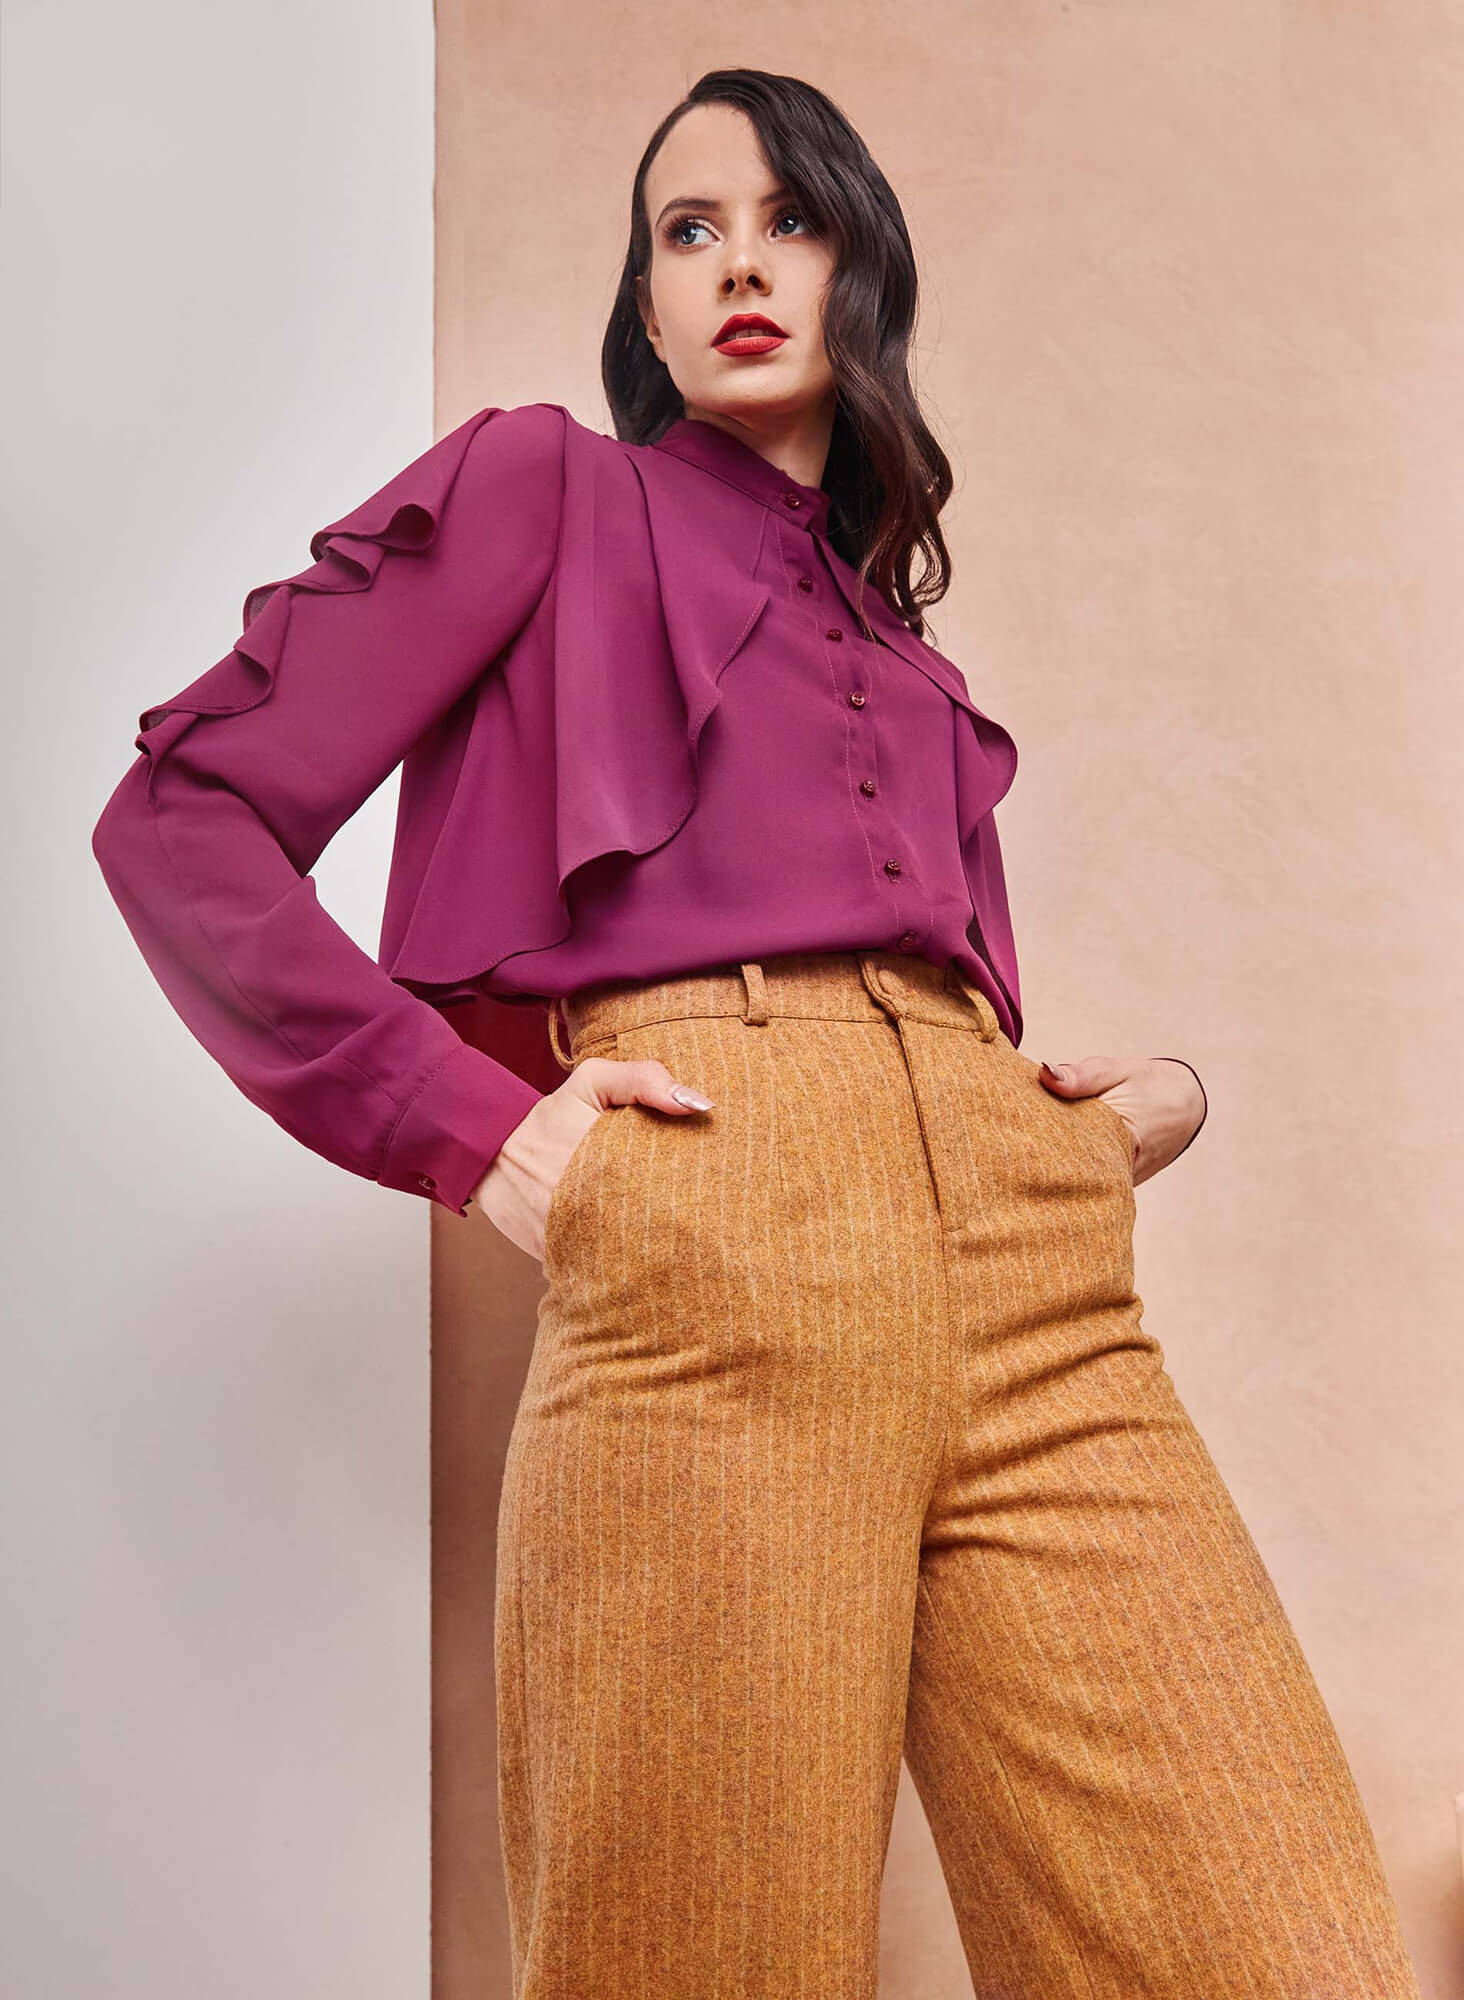 Drapped Ruffle Violet Shirt with High Rise Wool Caramel Pants